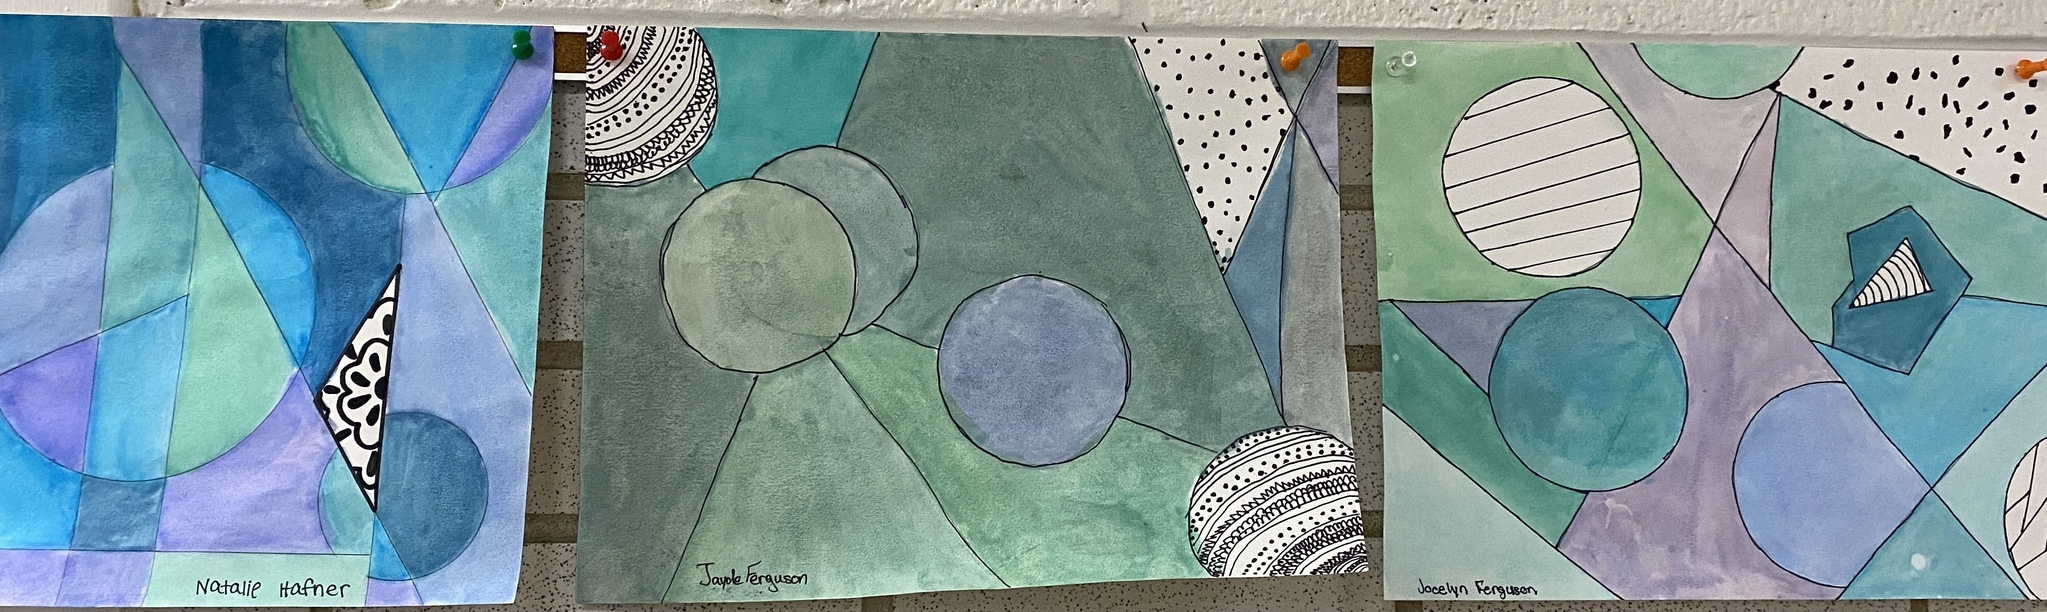 Random shapes on paper painted with pastel colors of blue, green, and purple